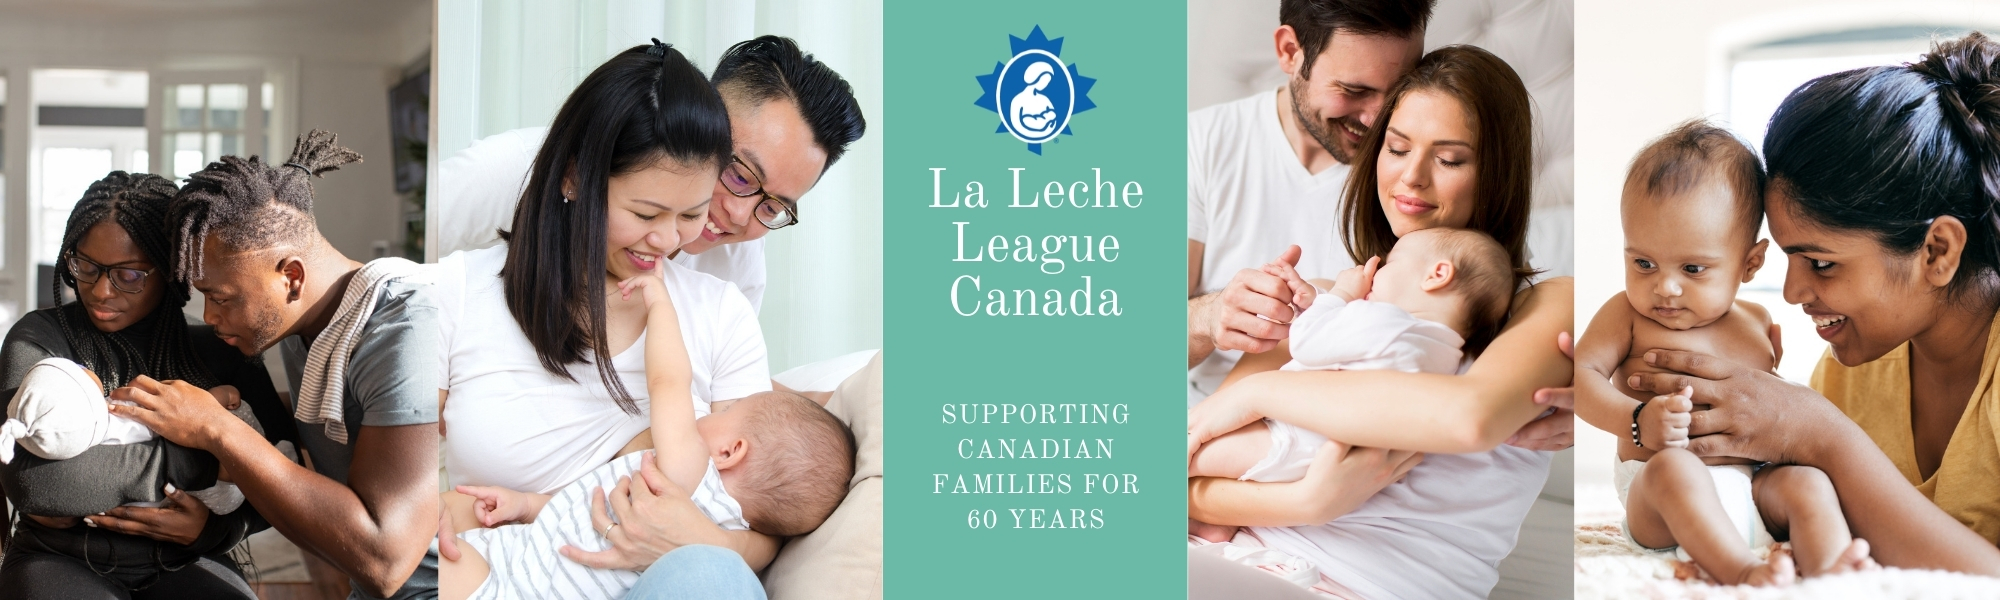 Get Help La Leche League Canada Breastfeeding Support And Information 